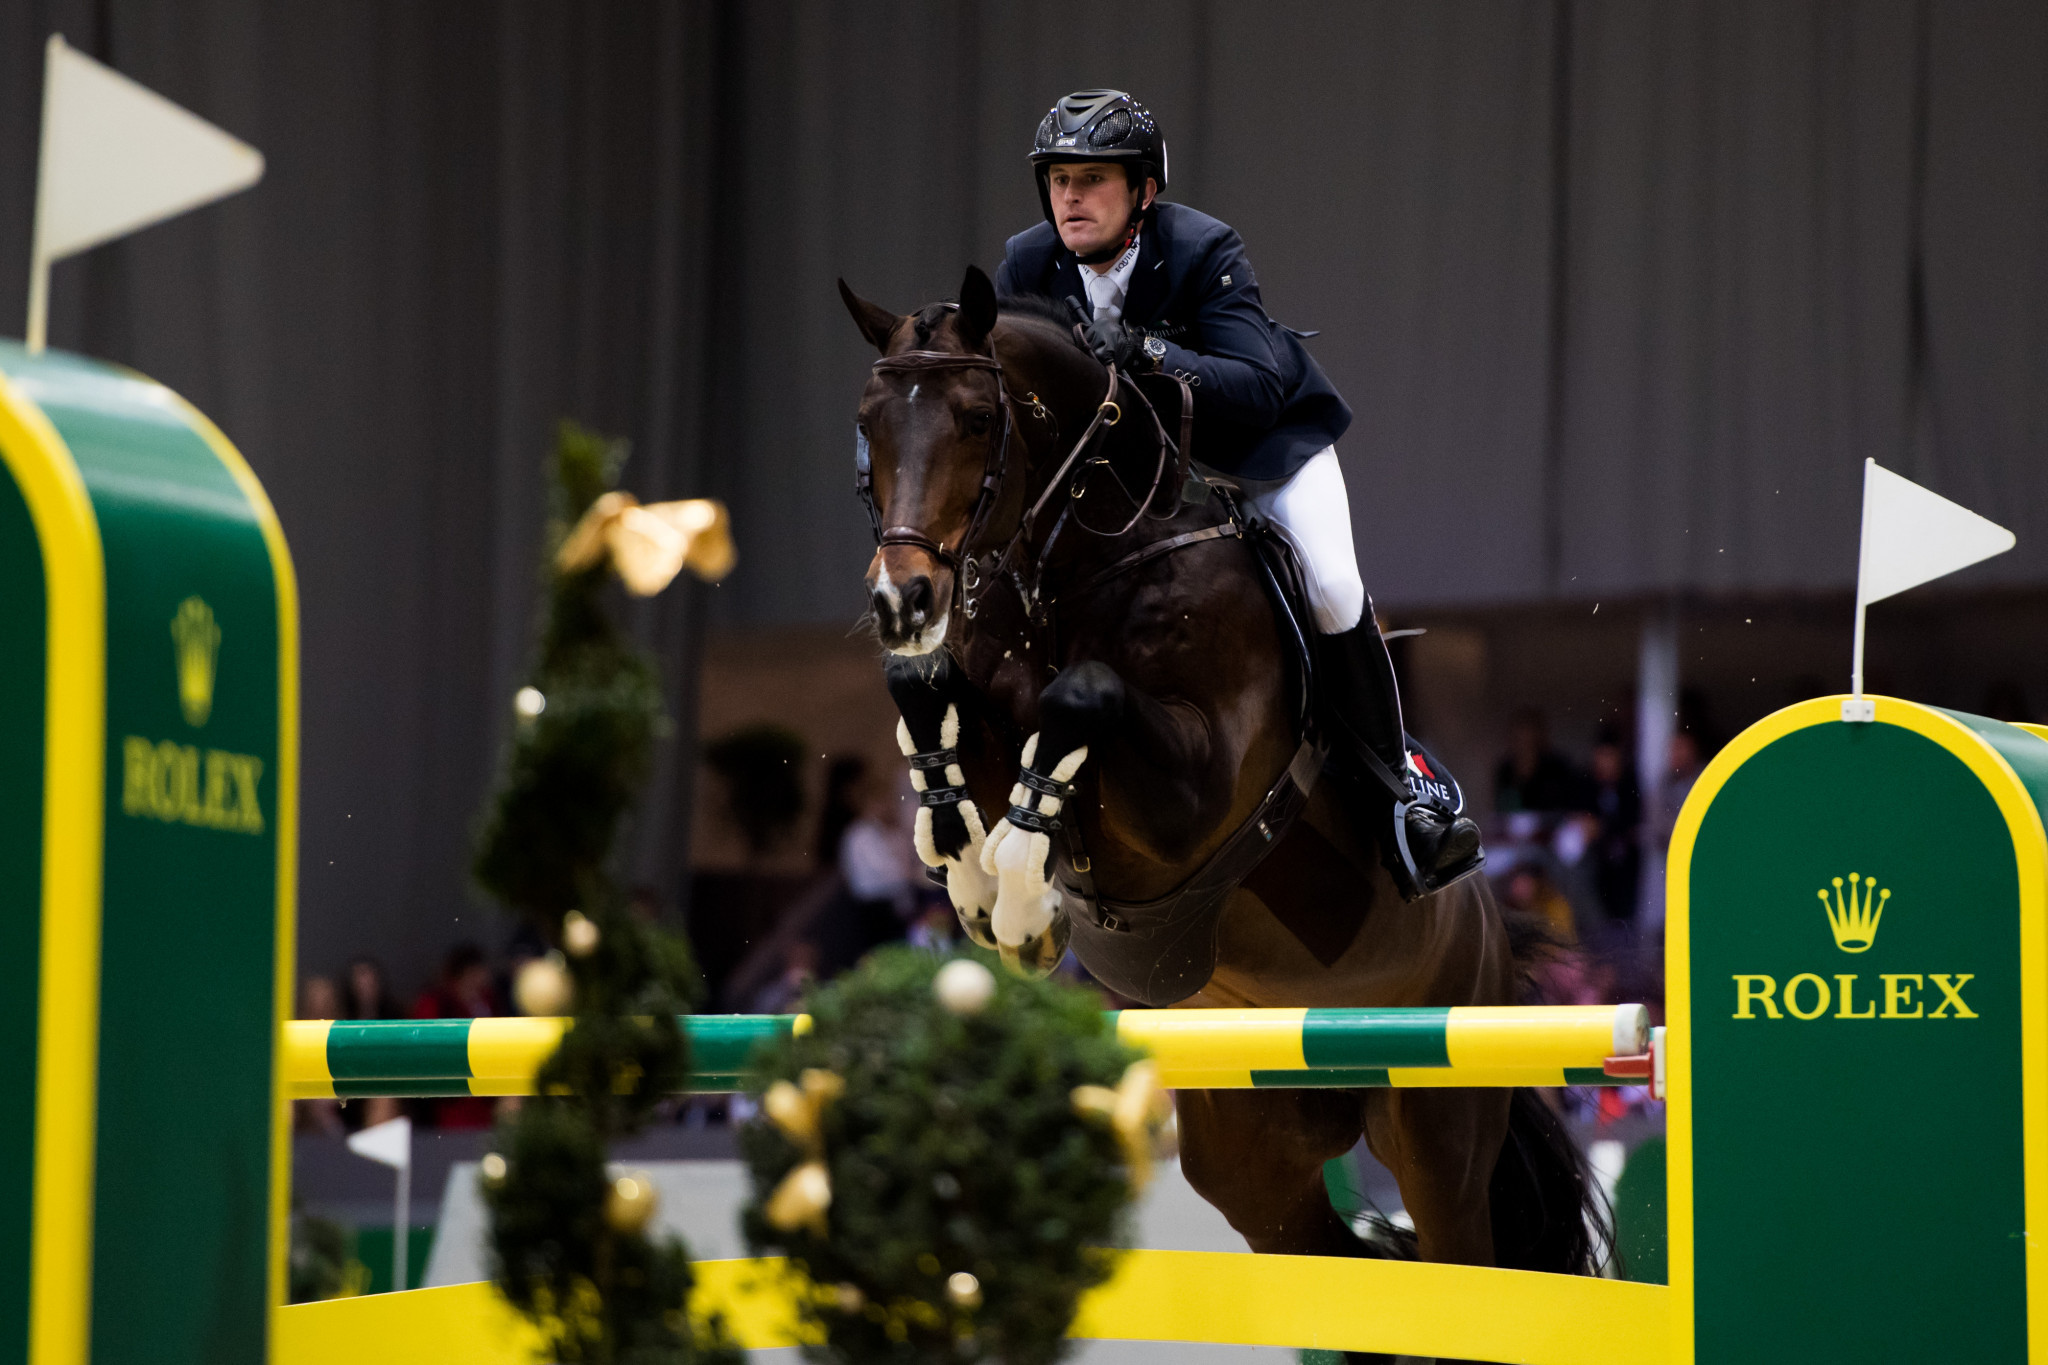 Ireland's Darragh Kenny claimed victory in the "Prize of Handwerk" jumping competition as action continued today at the World Equestrian Festival in Aachen in Germany ©Getty Images